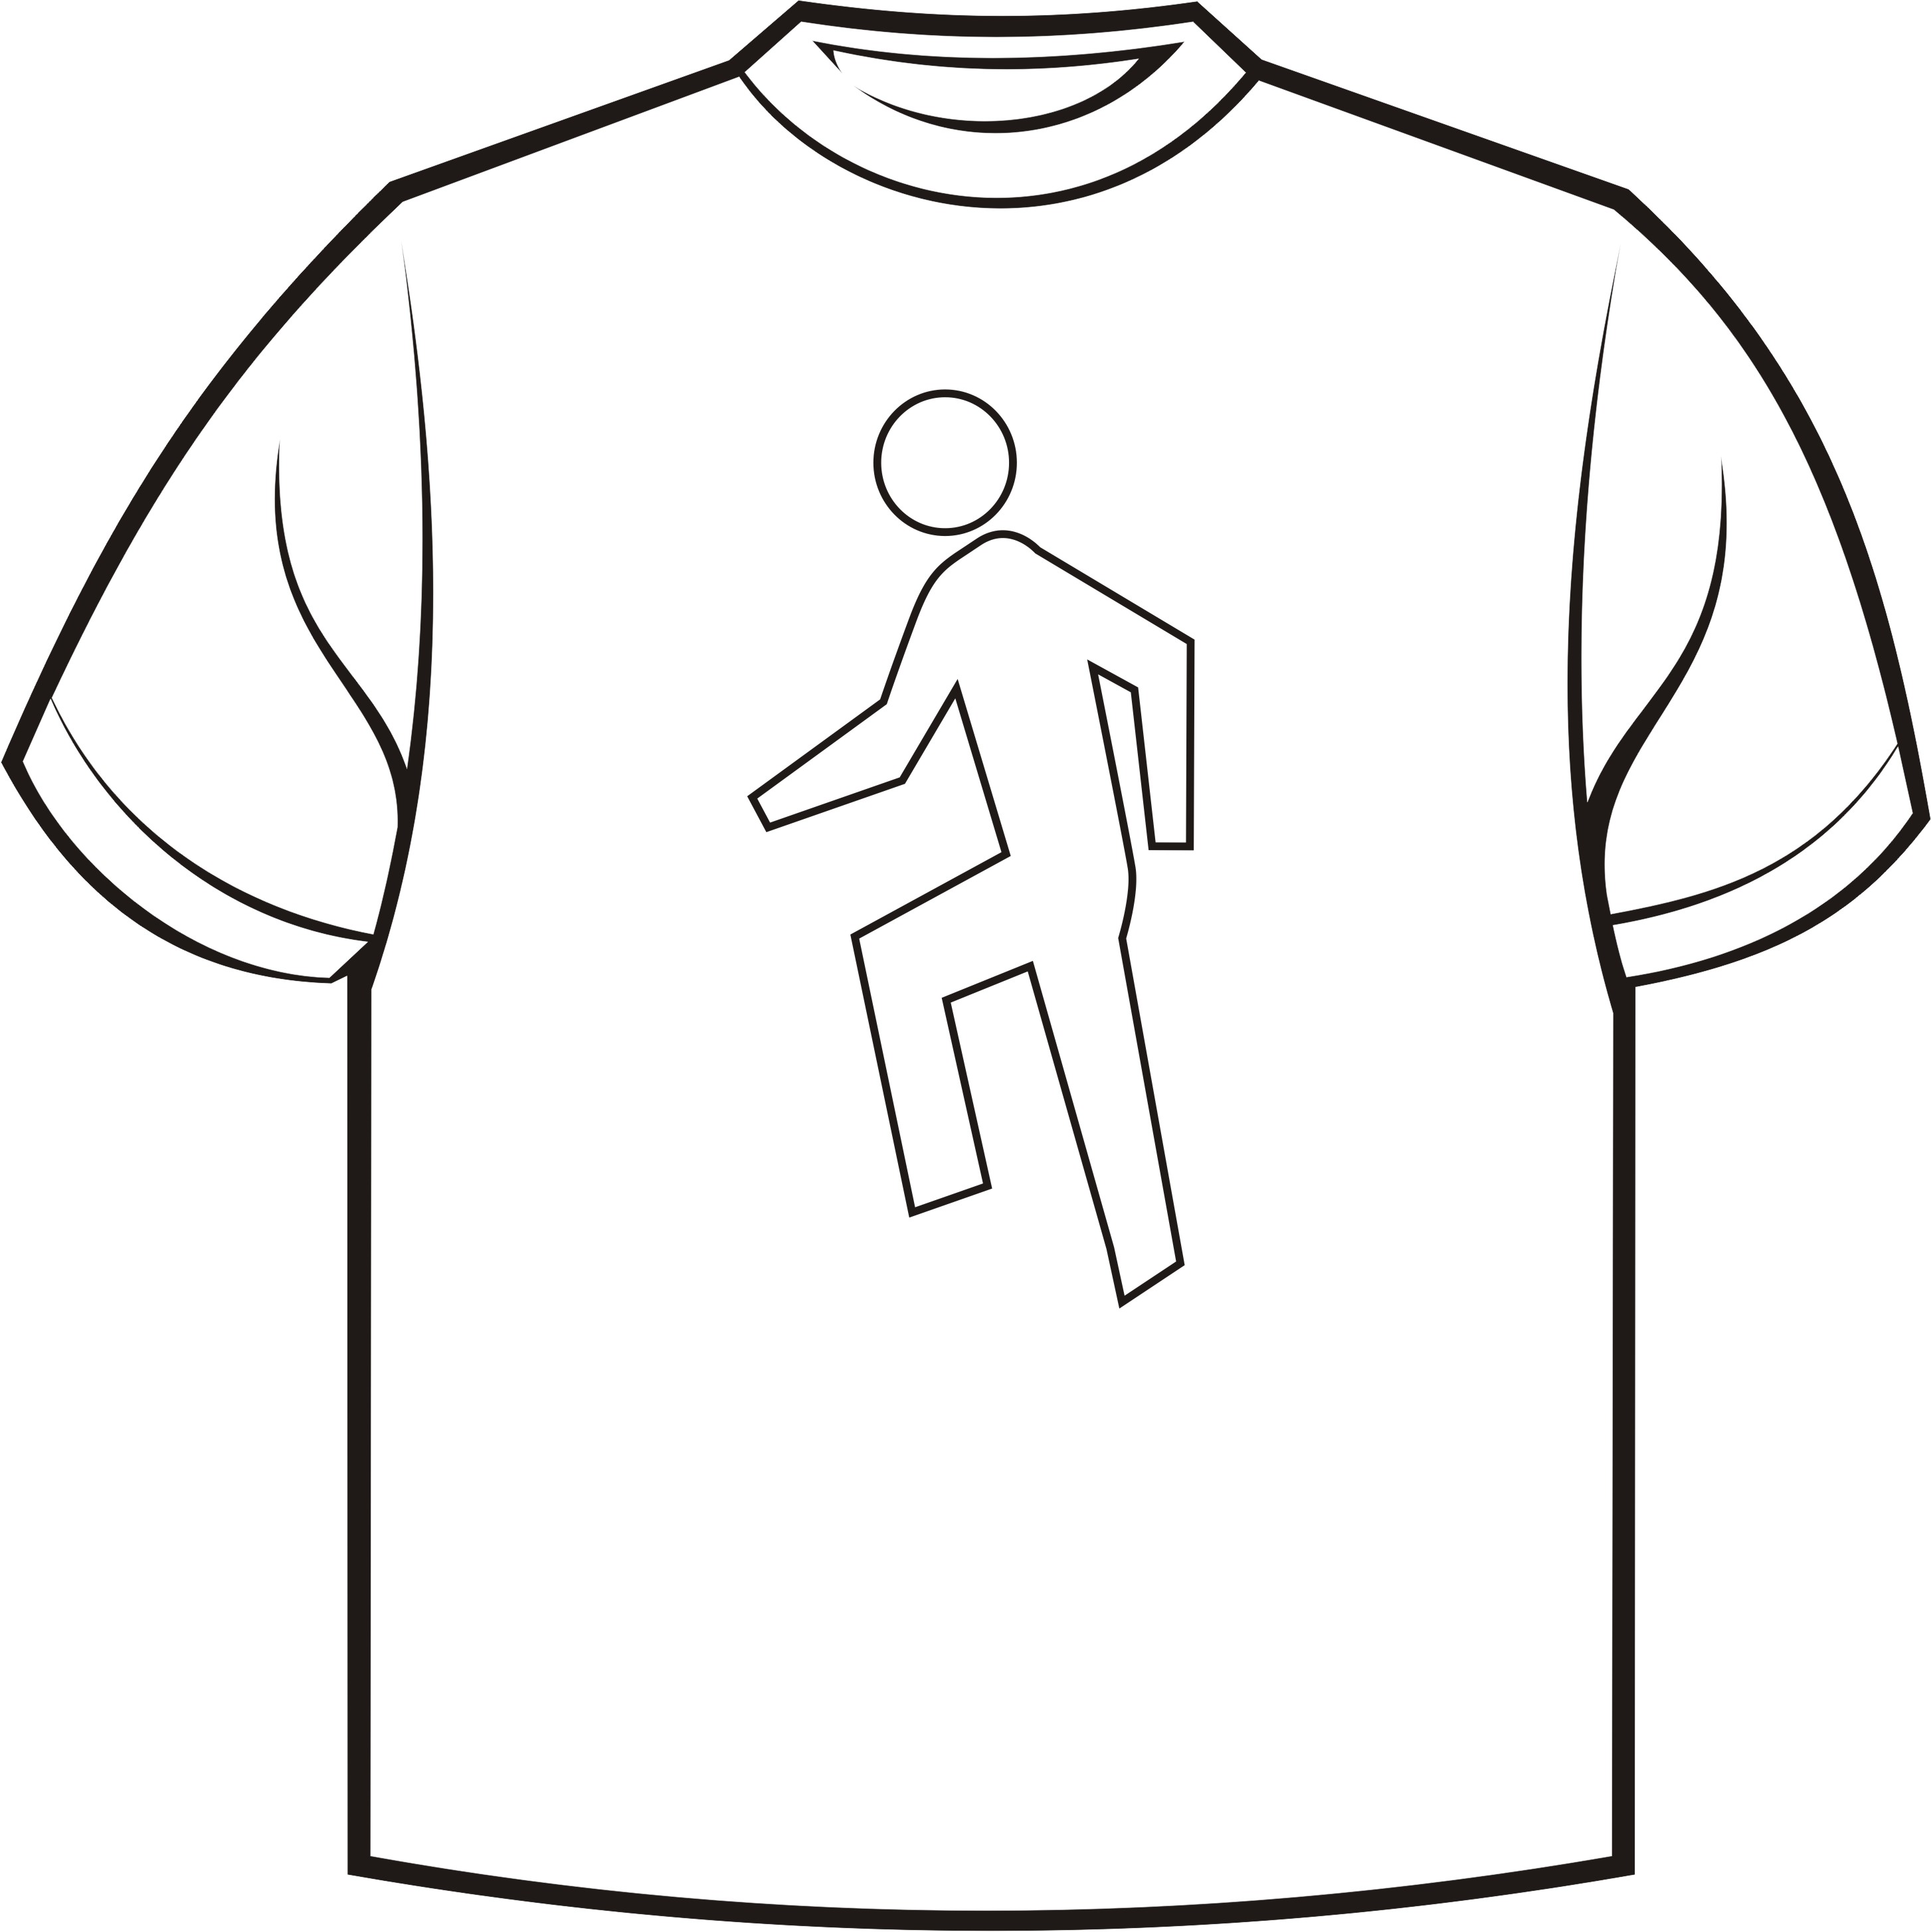 Printable T Shirt Template For Kids - ClipArt Best